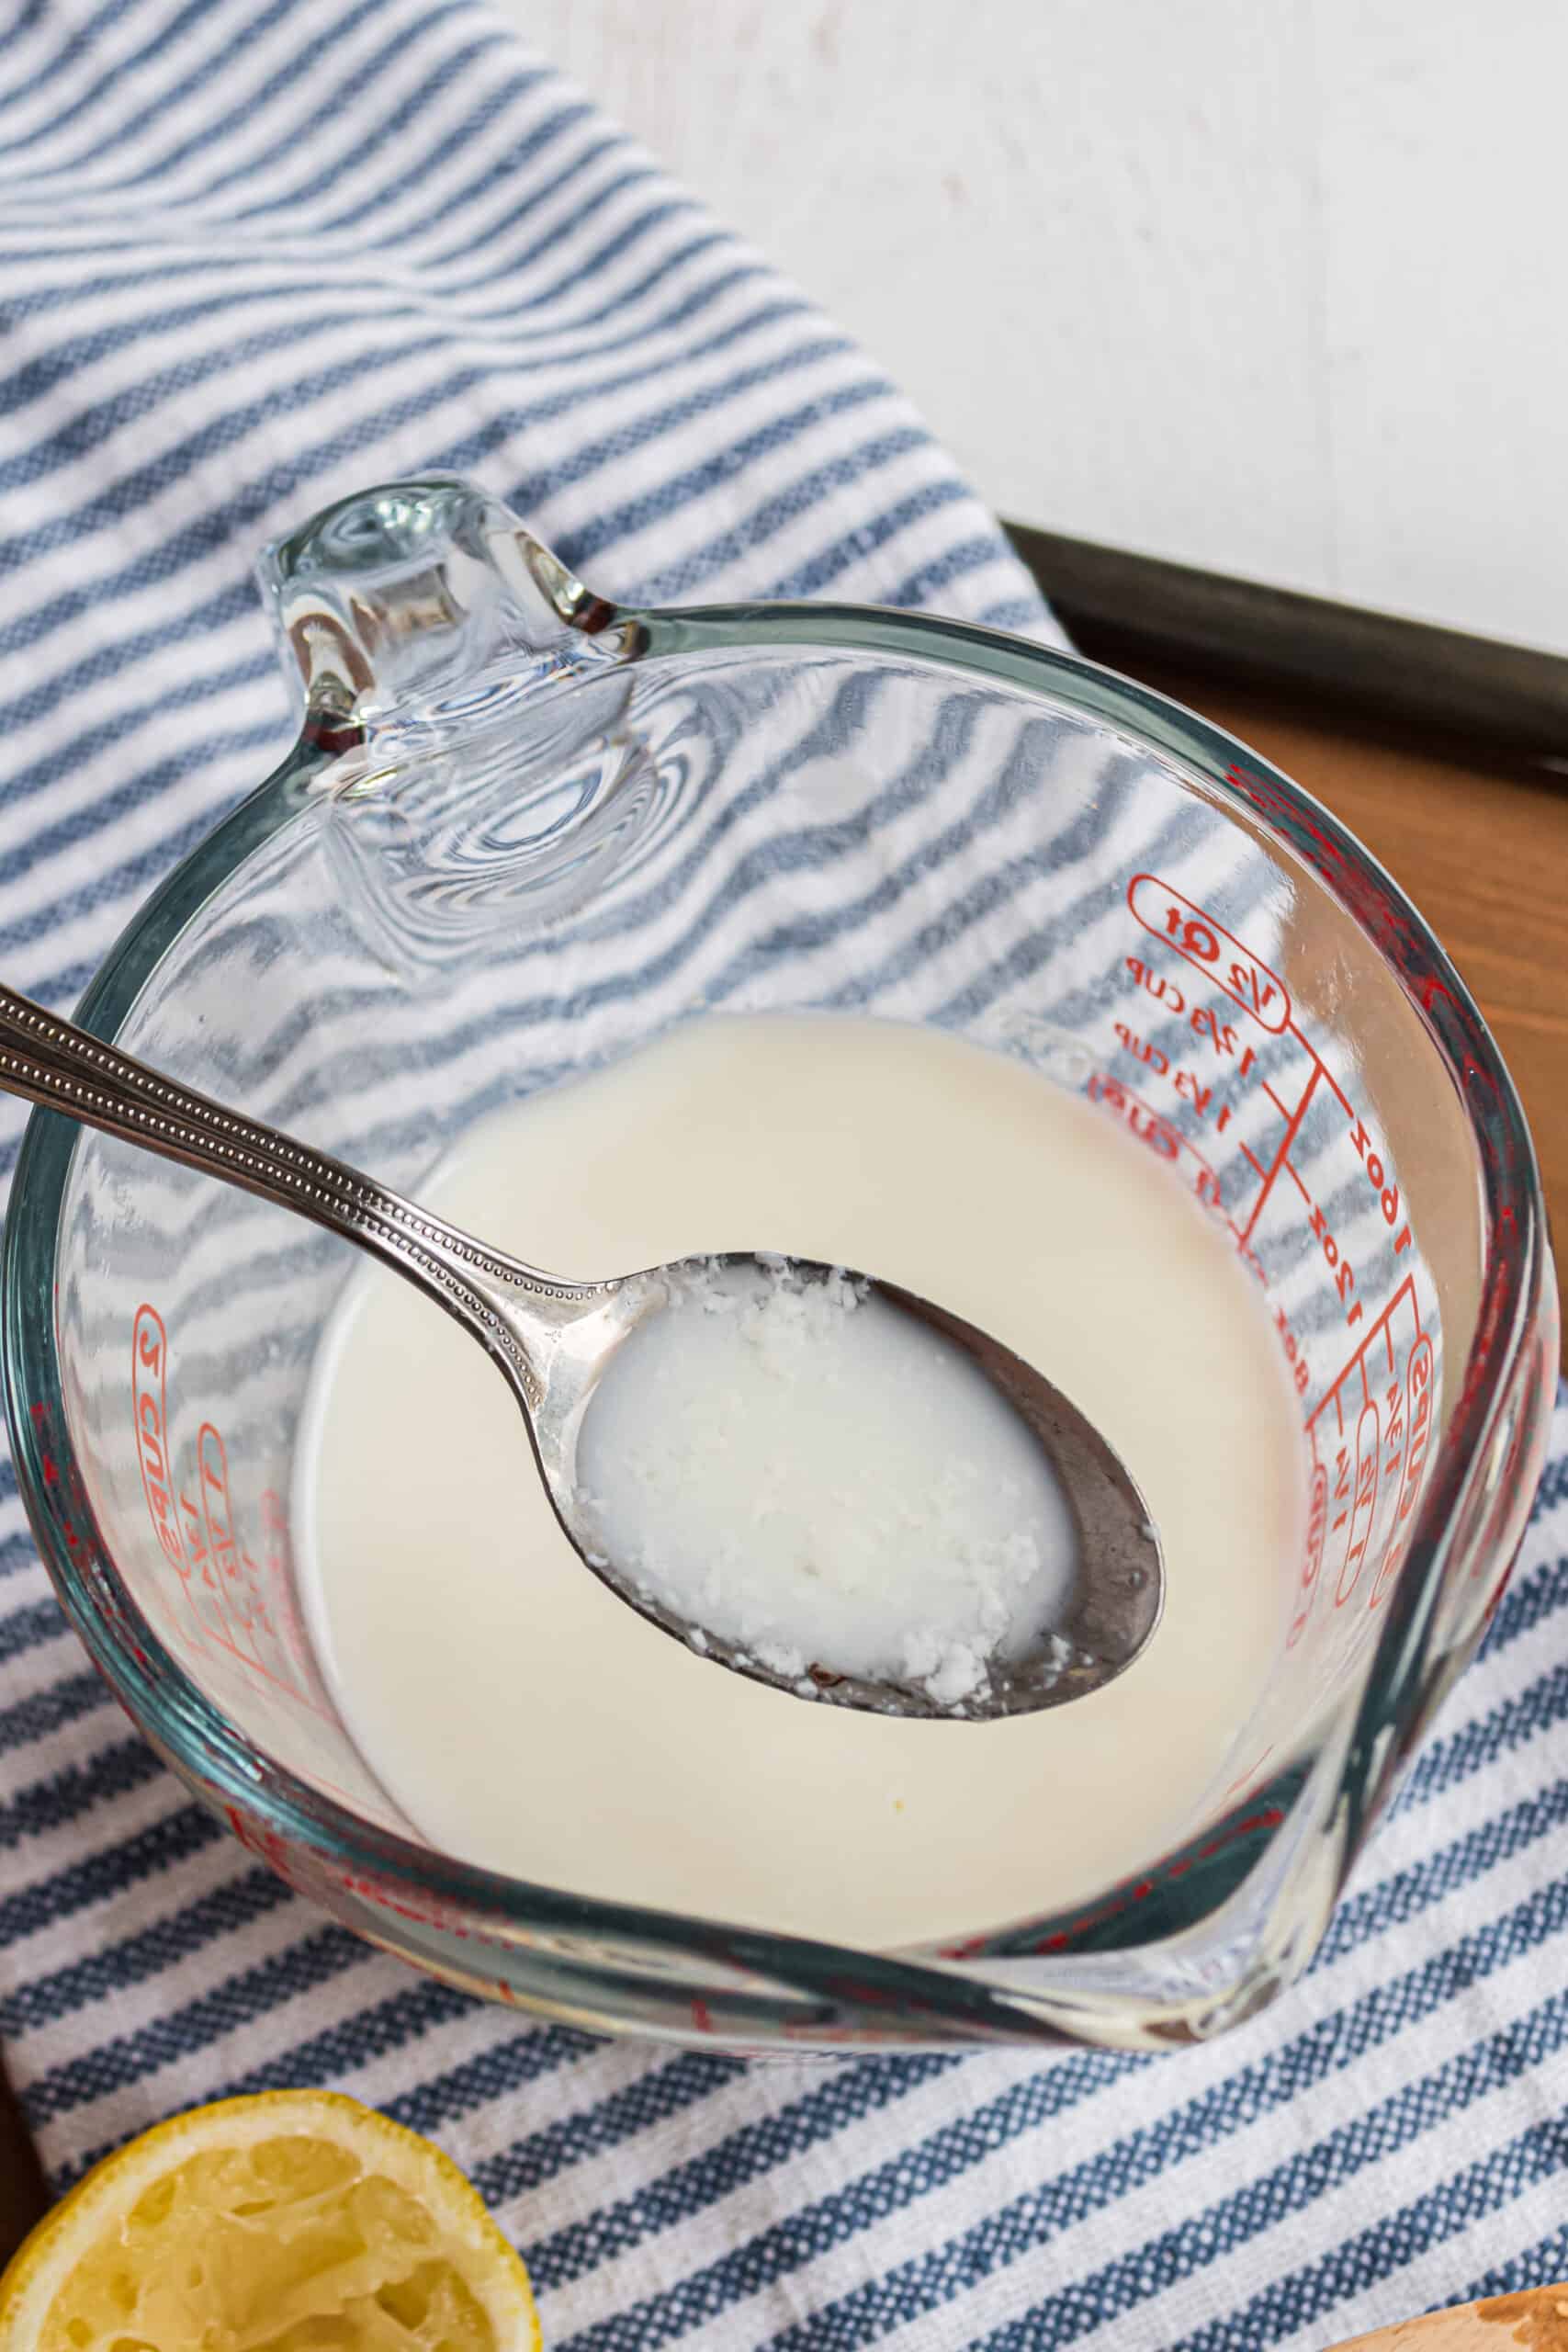 Homemade buttermilk substitute in a glass bowl with a spoon showing it curdled.